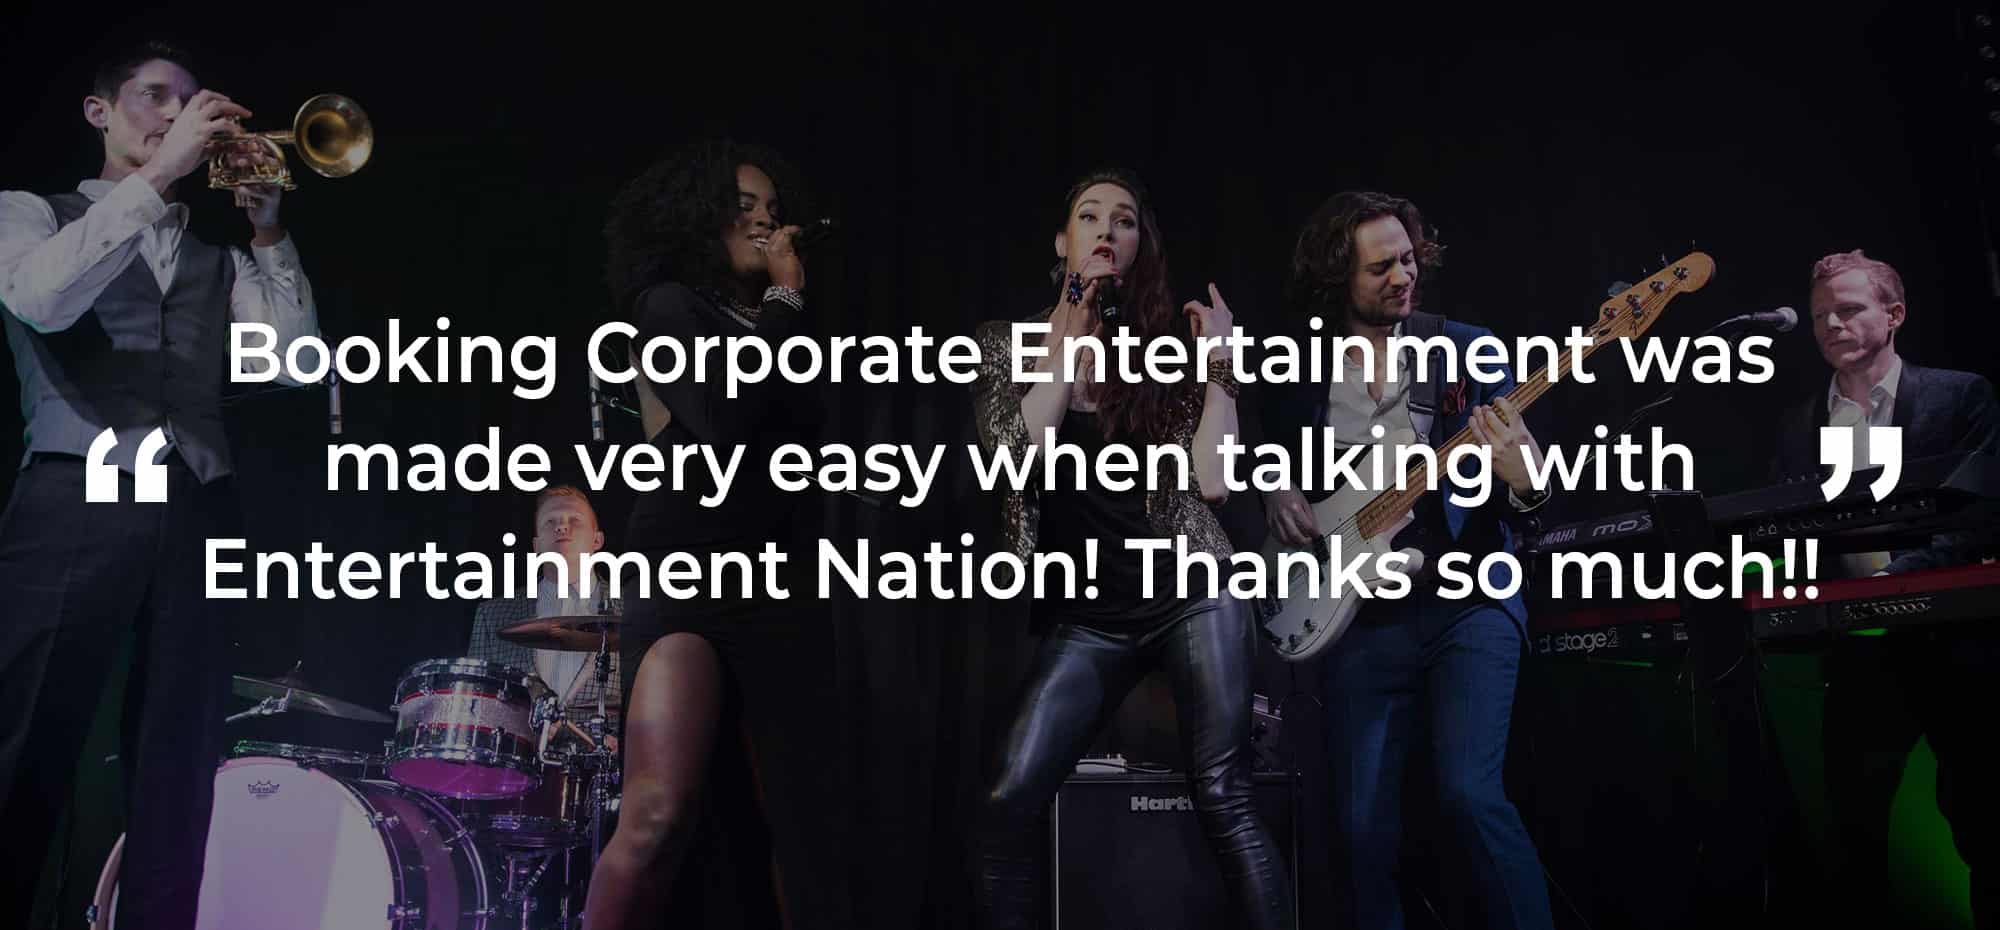 Client Review of Corporate Entertainment Somerset